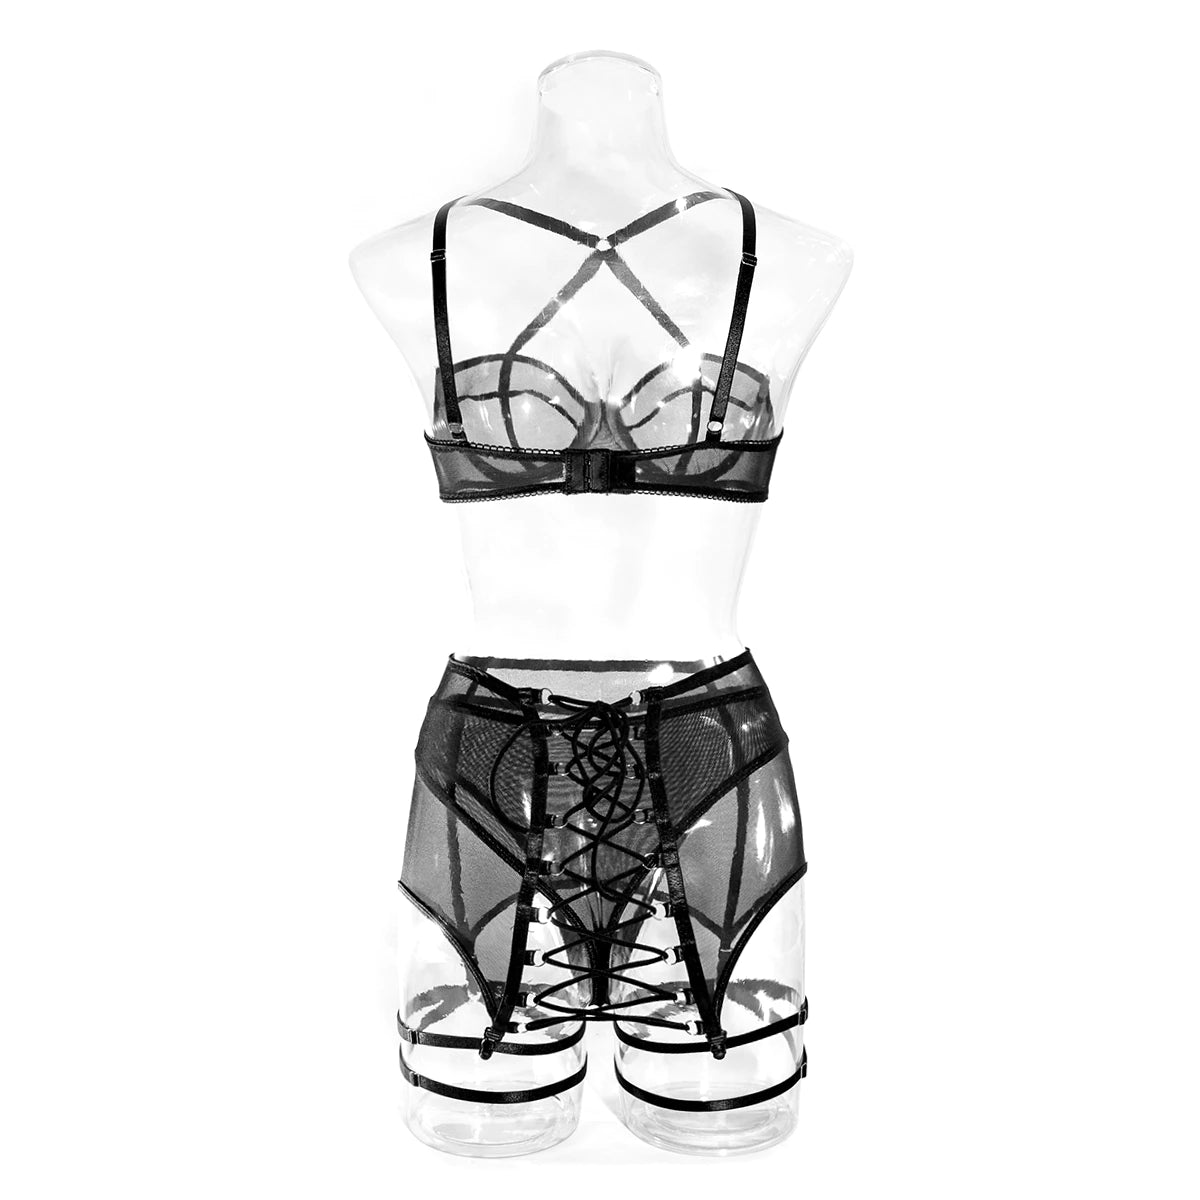 US$21.01-Hollow Open Cup Lingerie Bandage Gothic Underwear Without  Censorship Transparent Bra And Panties With Garter Exotic Set-Description